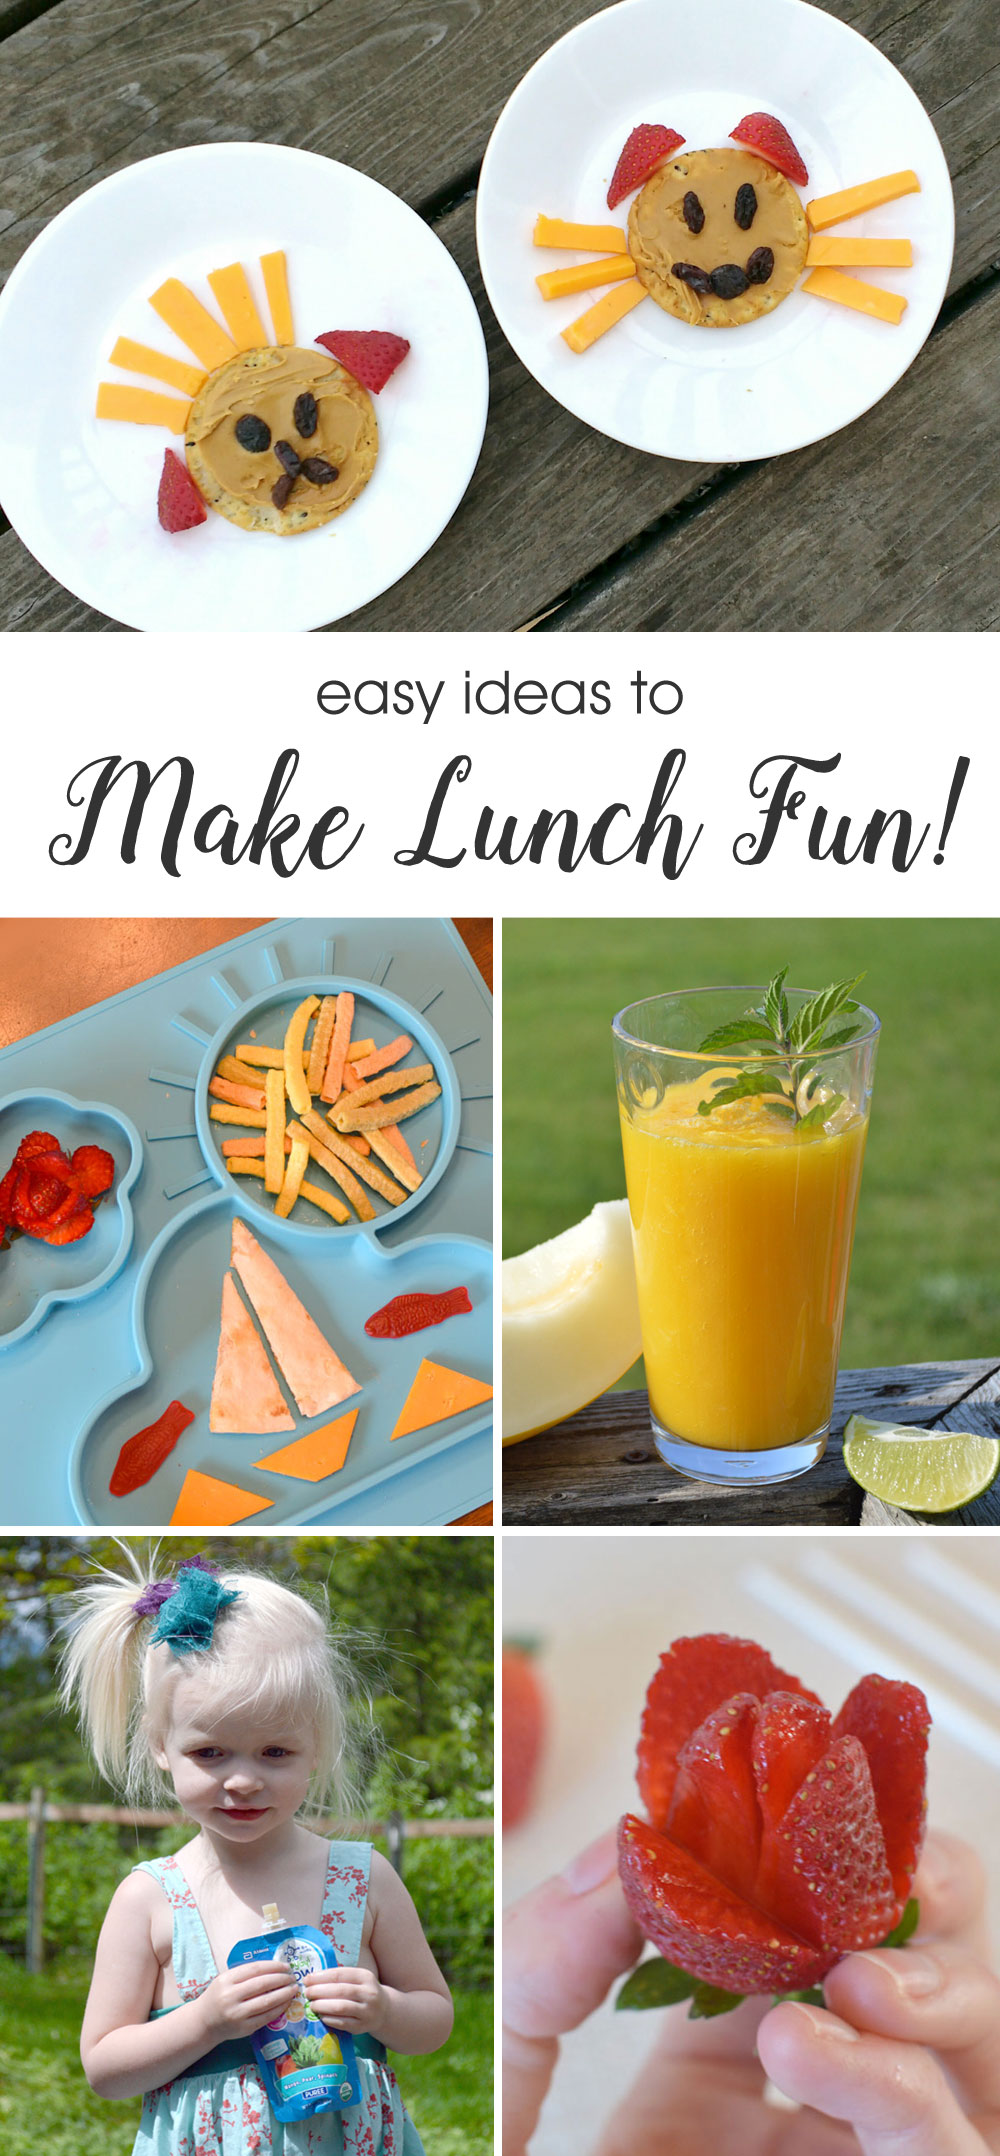 Easy ideas to make lunch fun for kids